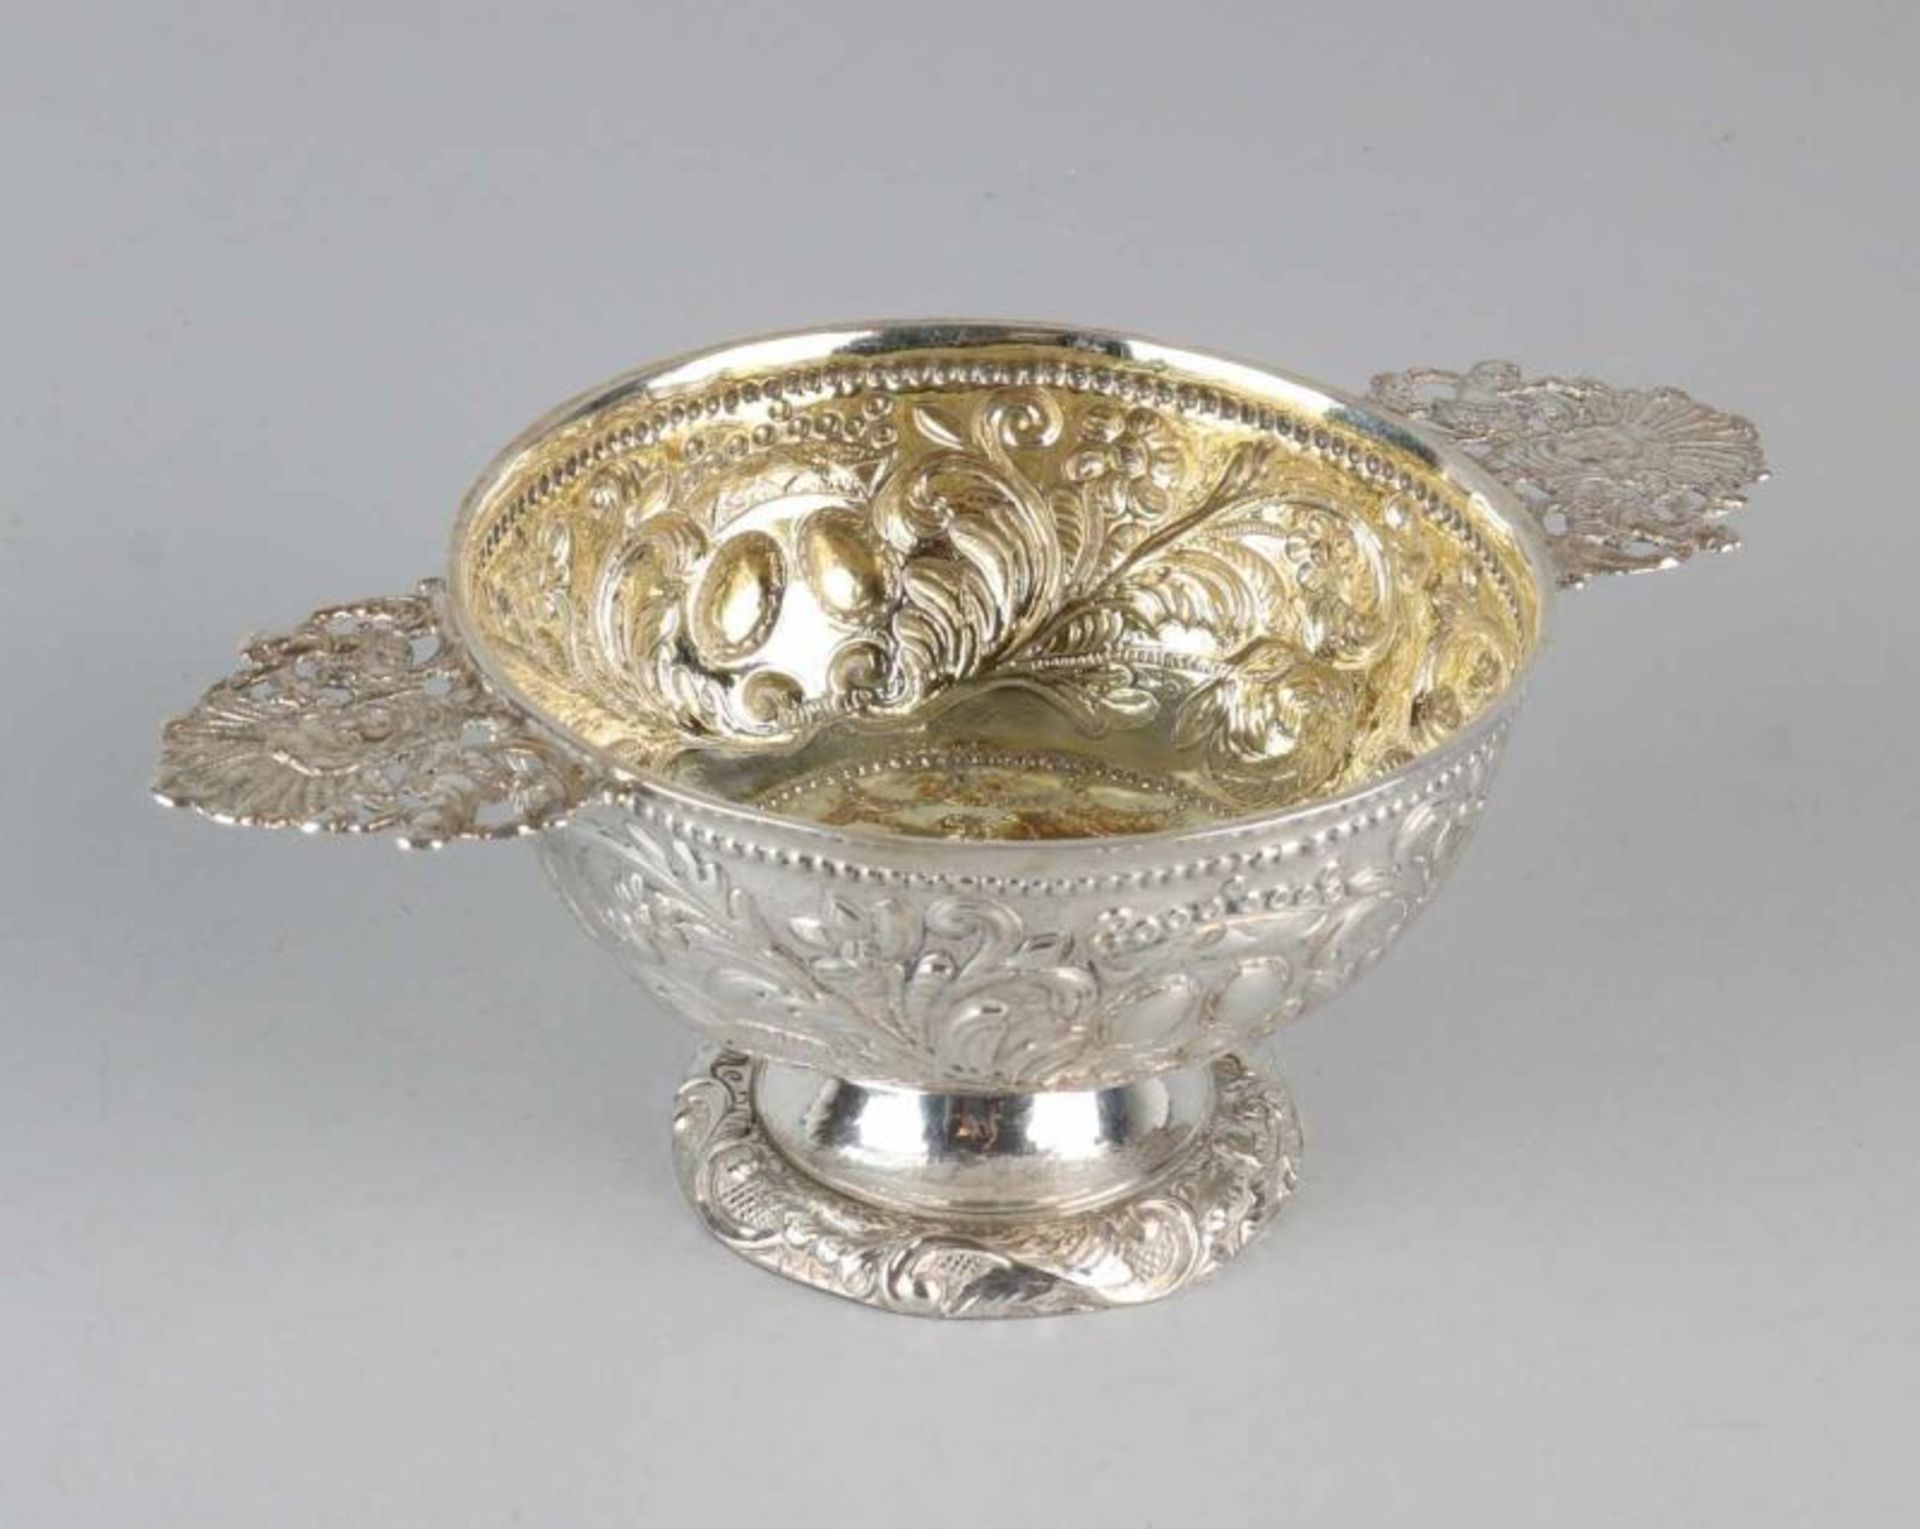 Silver brandy bowl, 934/000, round model, decorated with floral motifs, with vermeille inside,